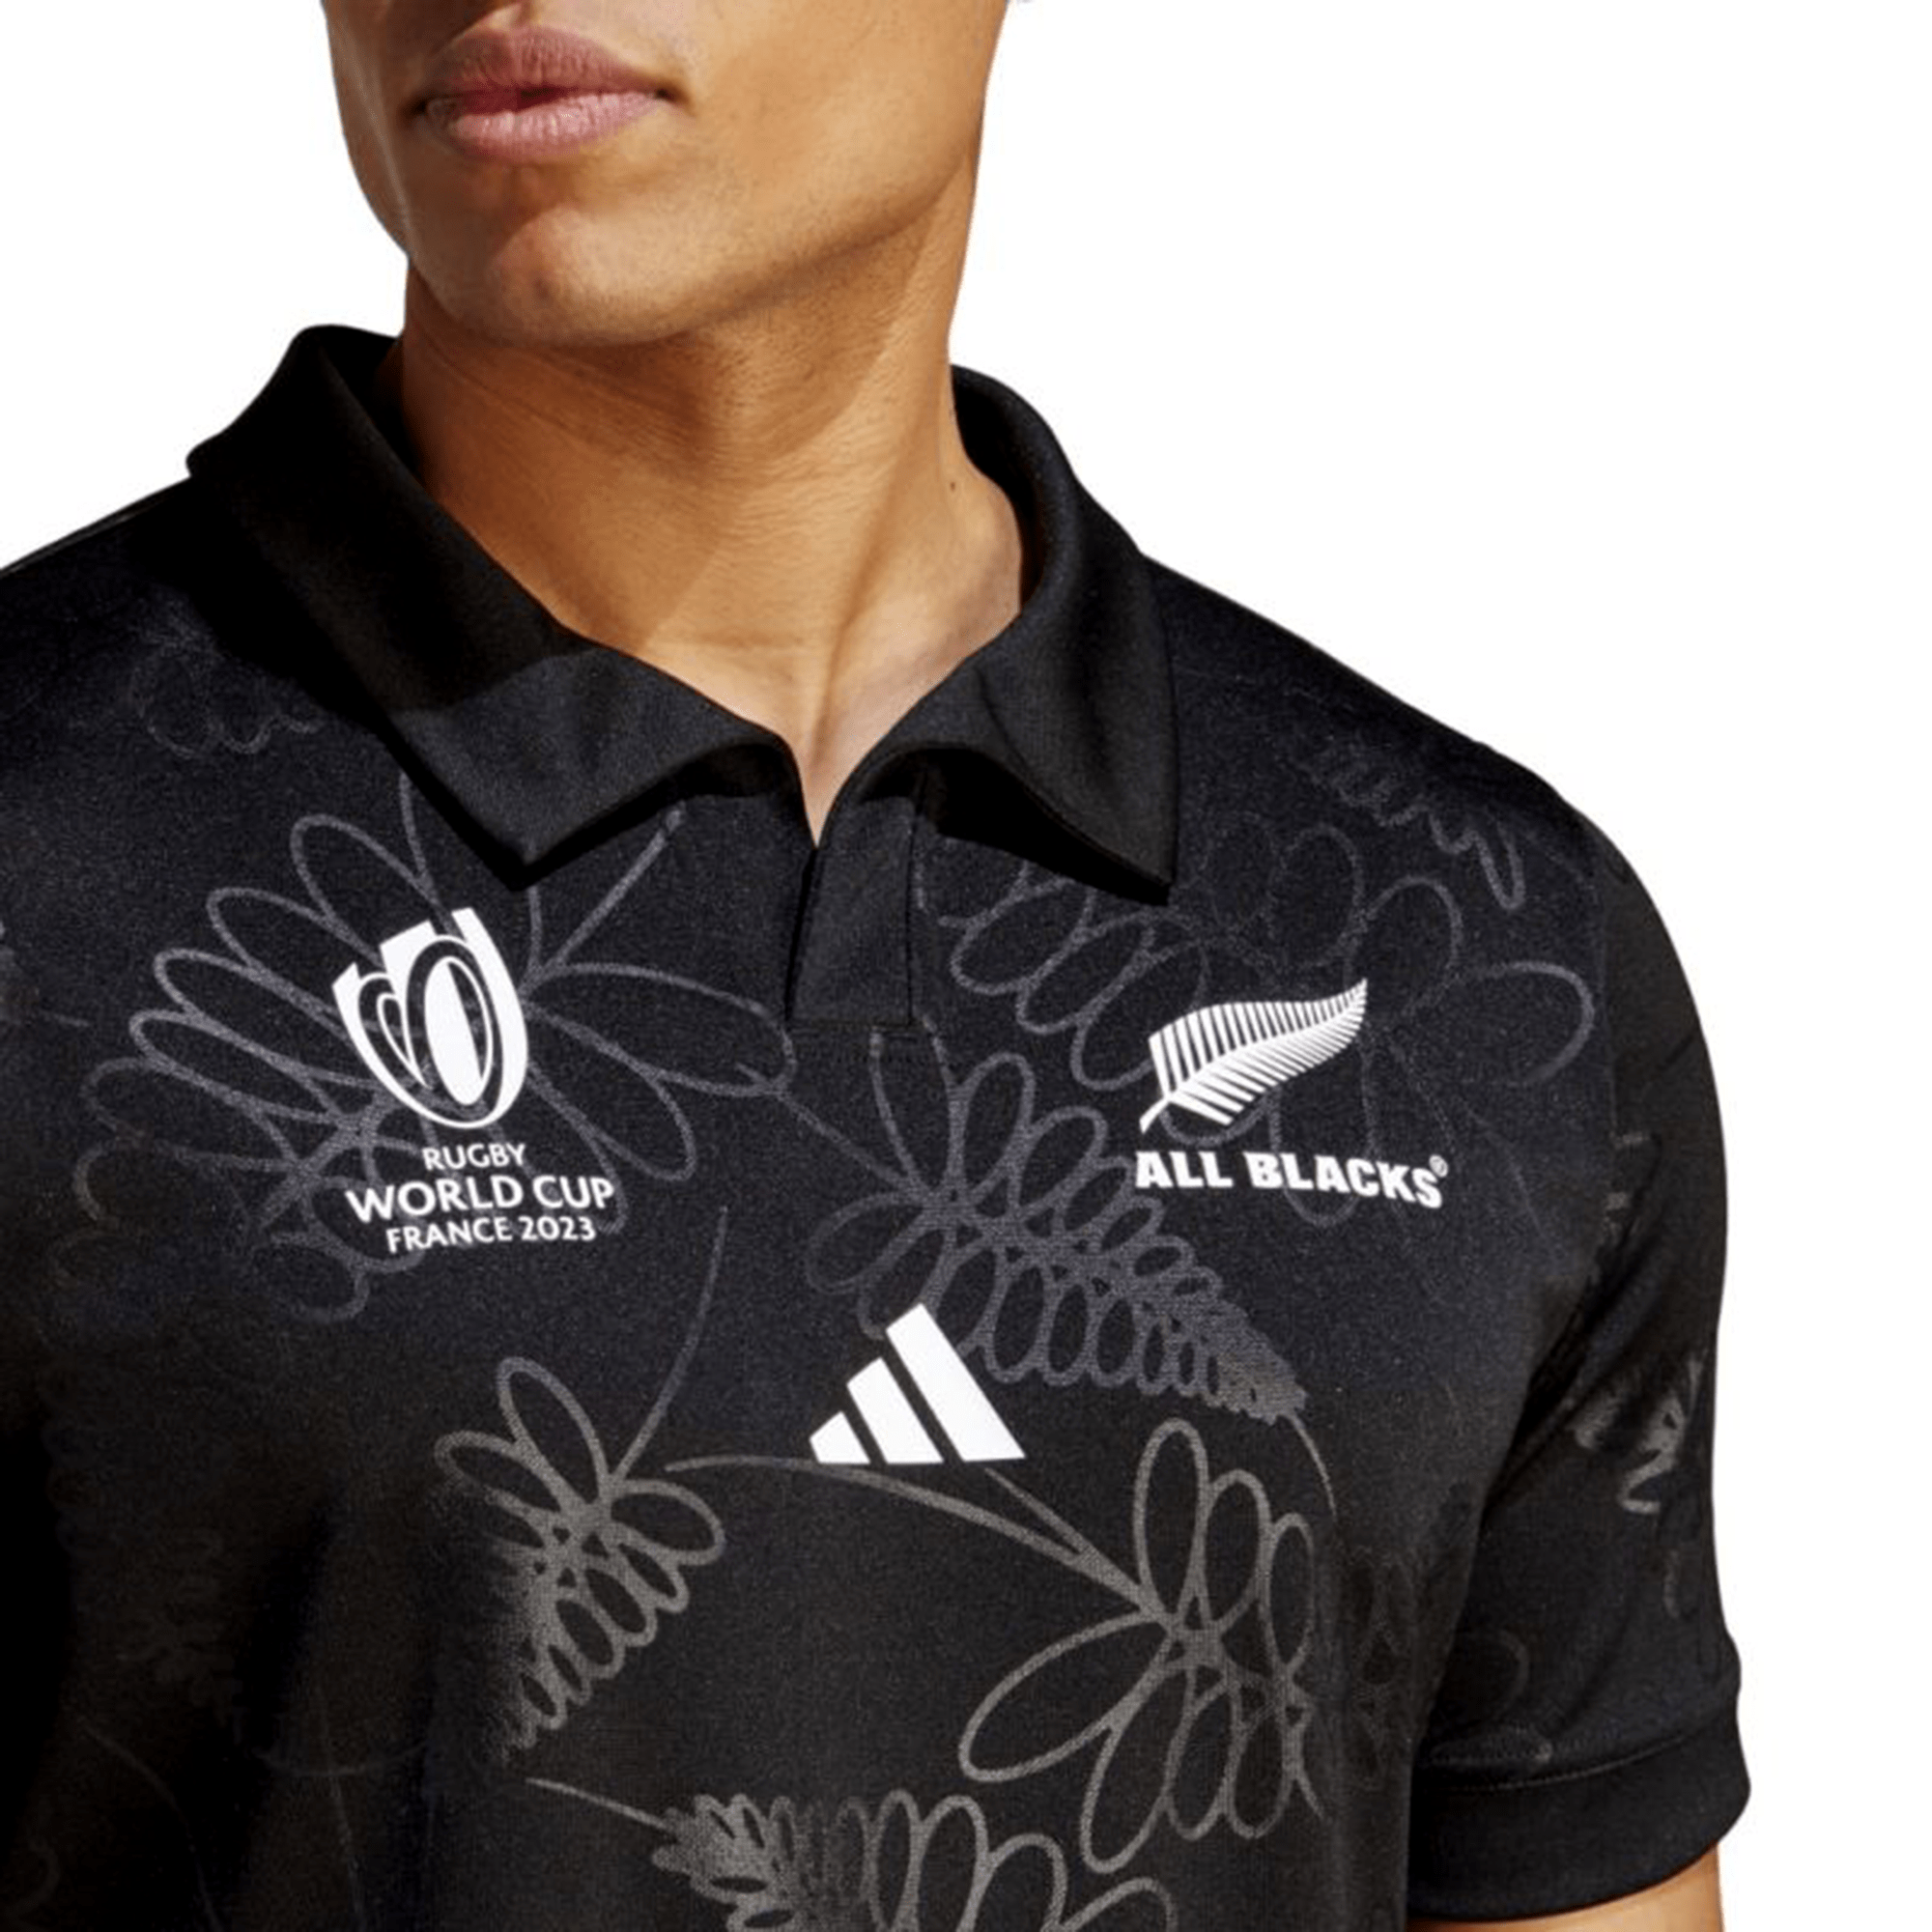 World New - Jersey RWC adidas Shop | by All 23 Blacks Rugby HZ9776 Zealand Supporter Home